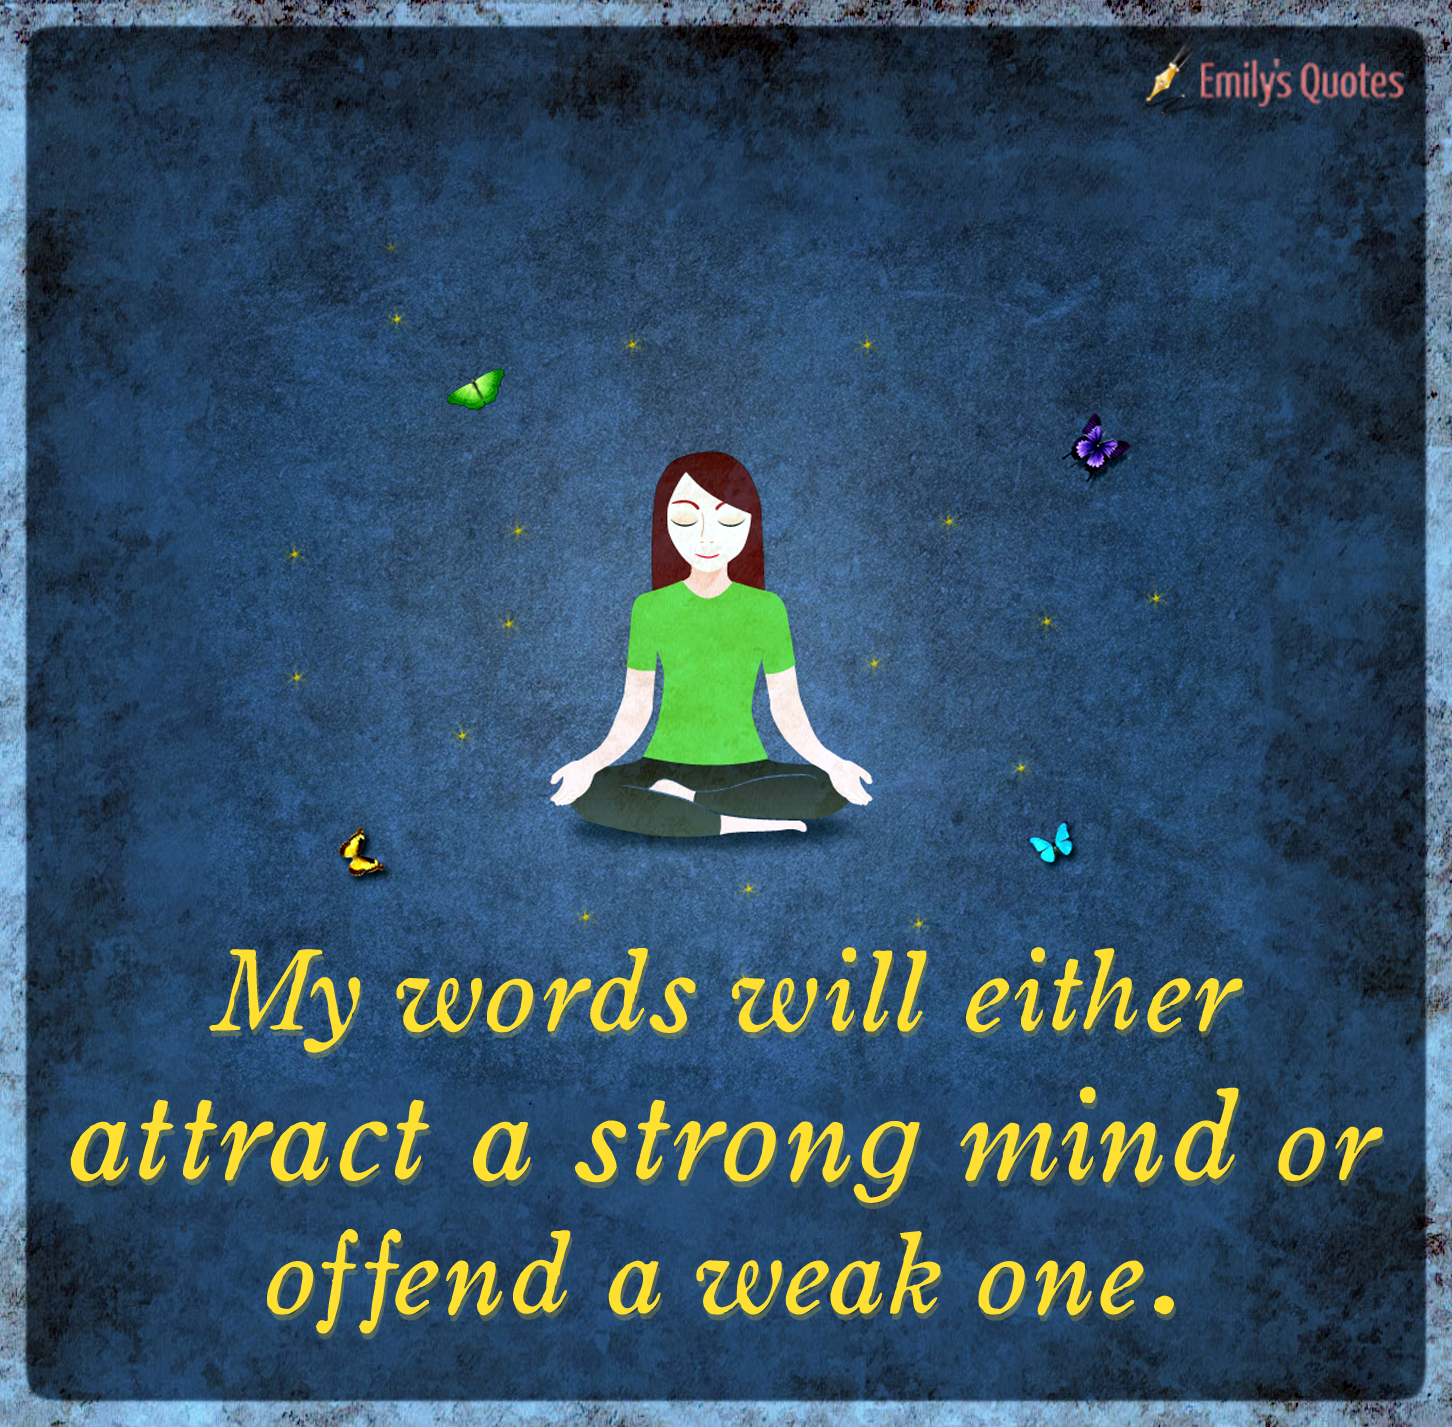 My words will either attract a strong mind or offend a weak one